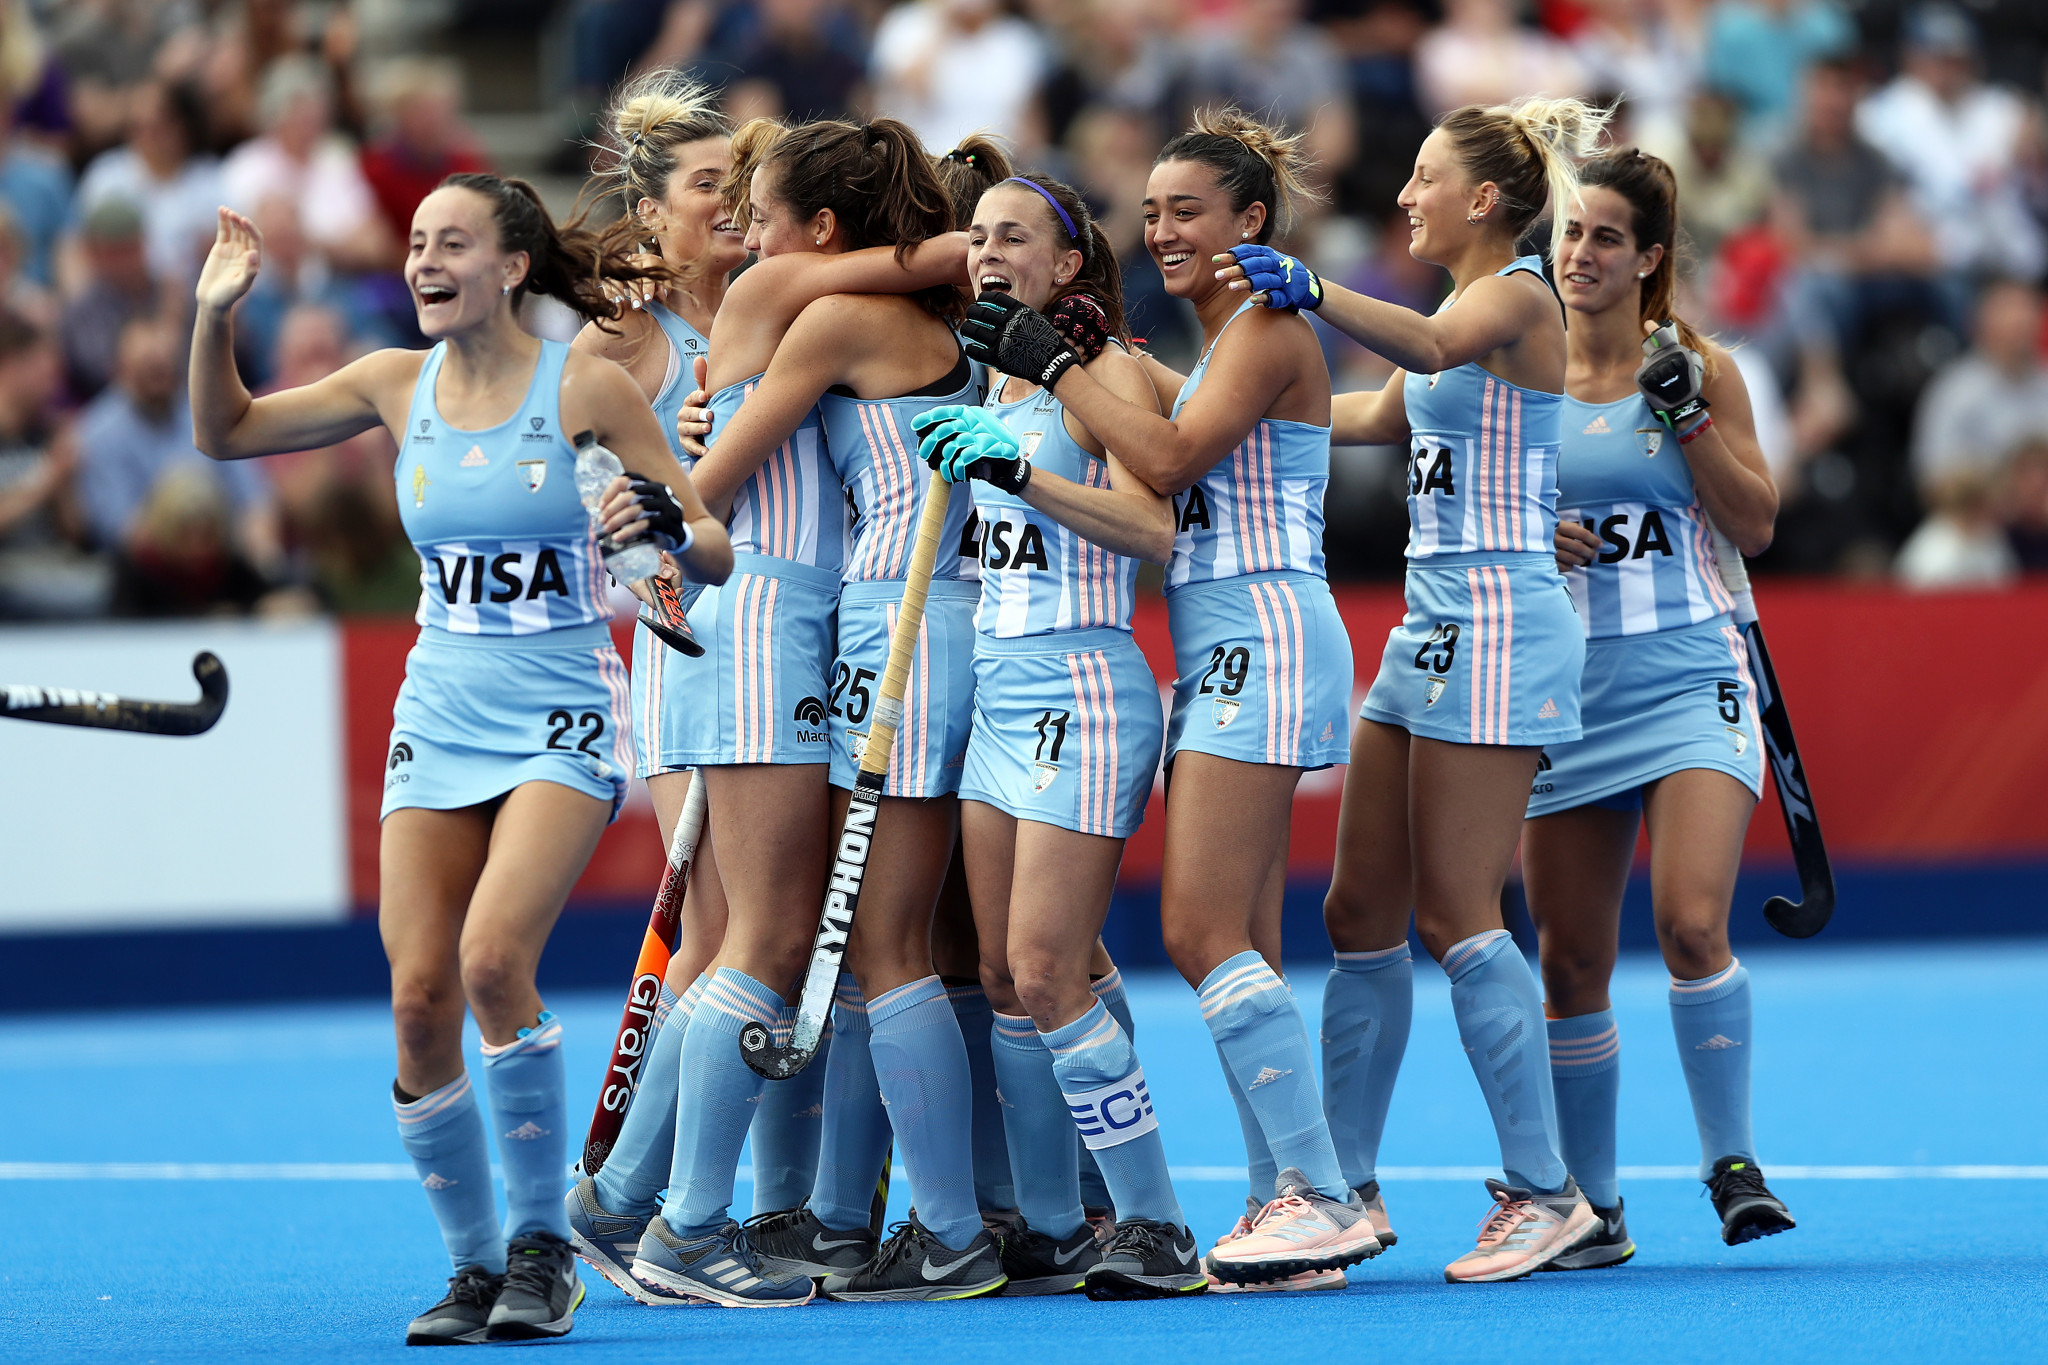 Argentina's women continued their impressive run of form by beating Britain in a shootout ©Getty Images